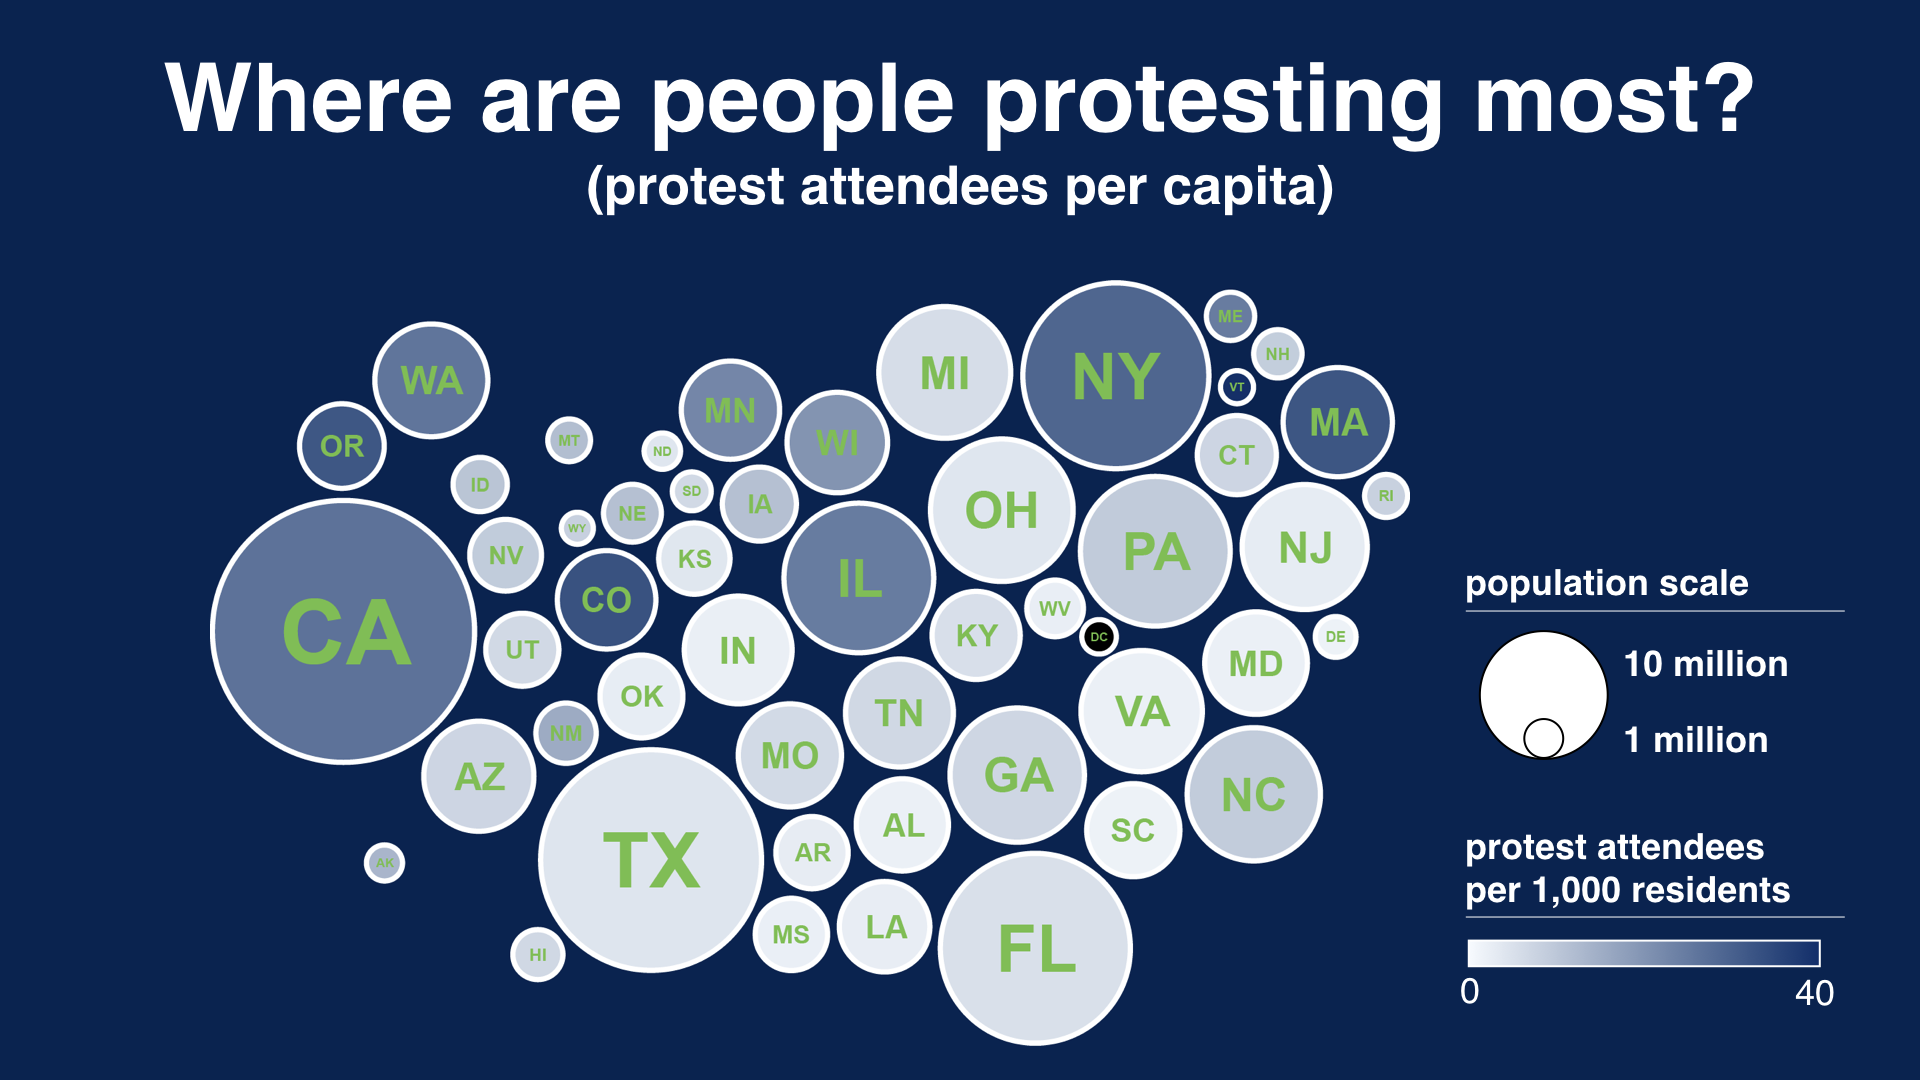 Cartogram showing states and the relationship between population and protest effort, measured as protesters per capita.